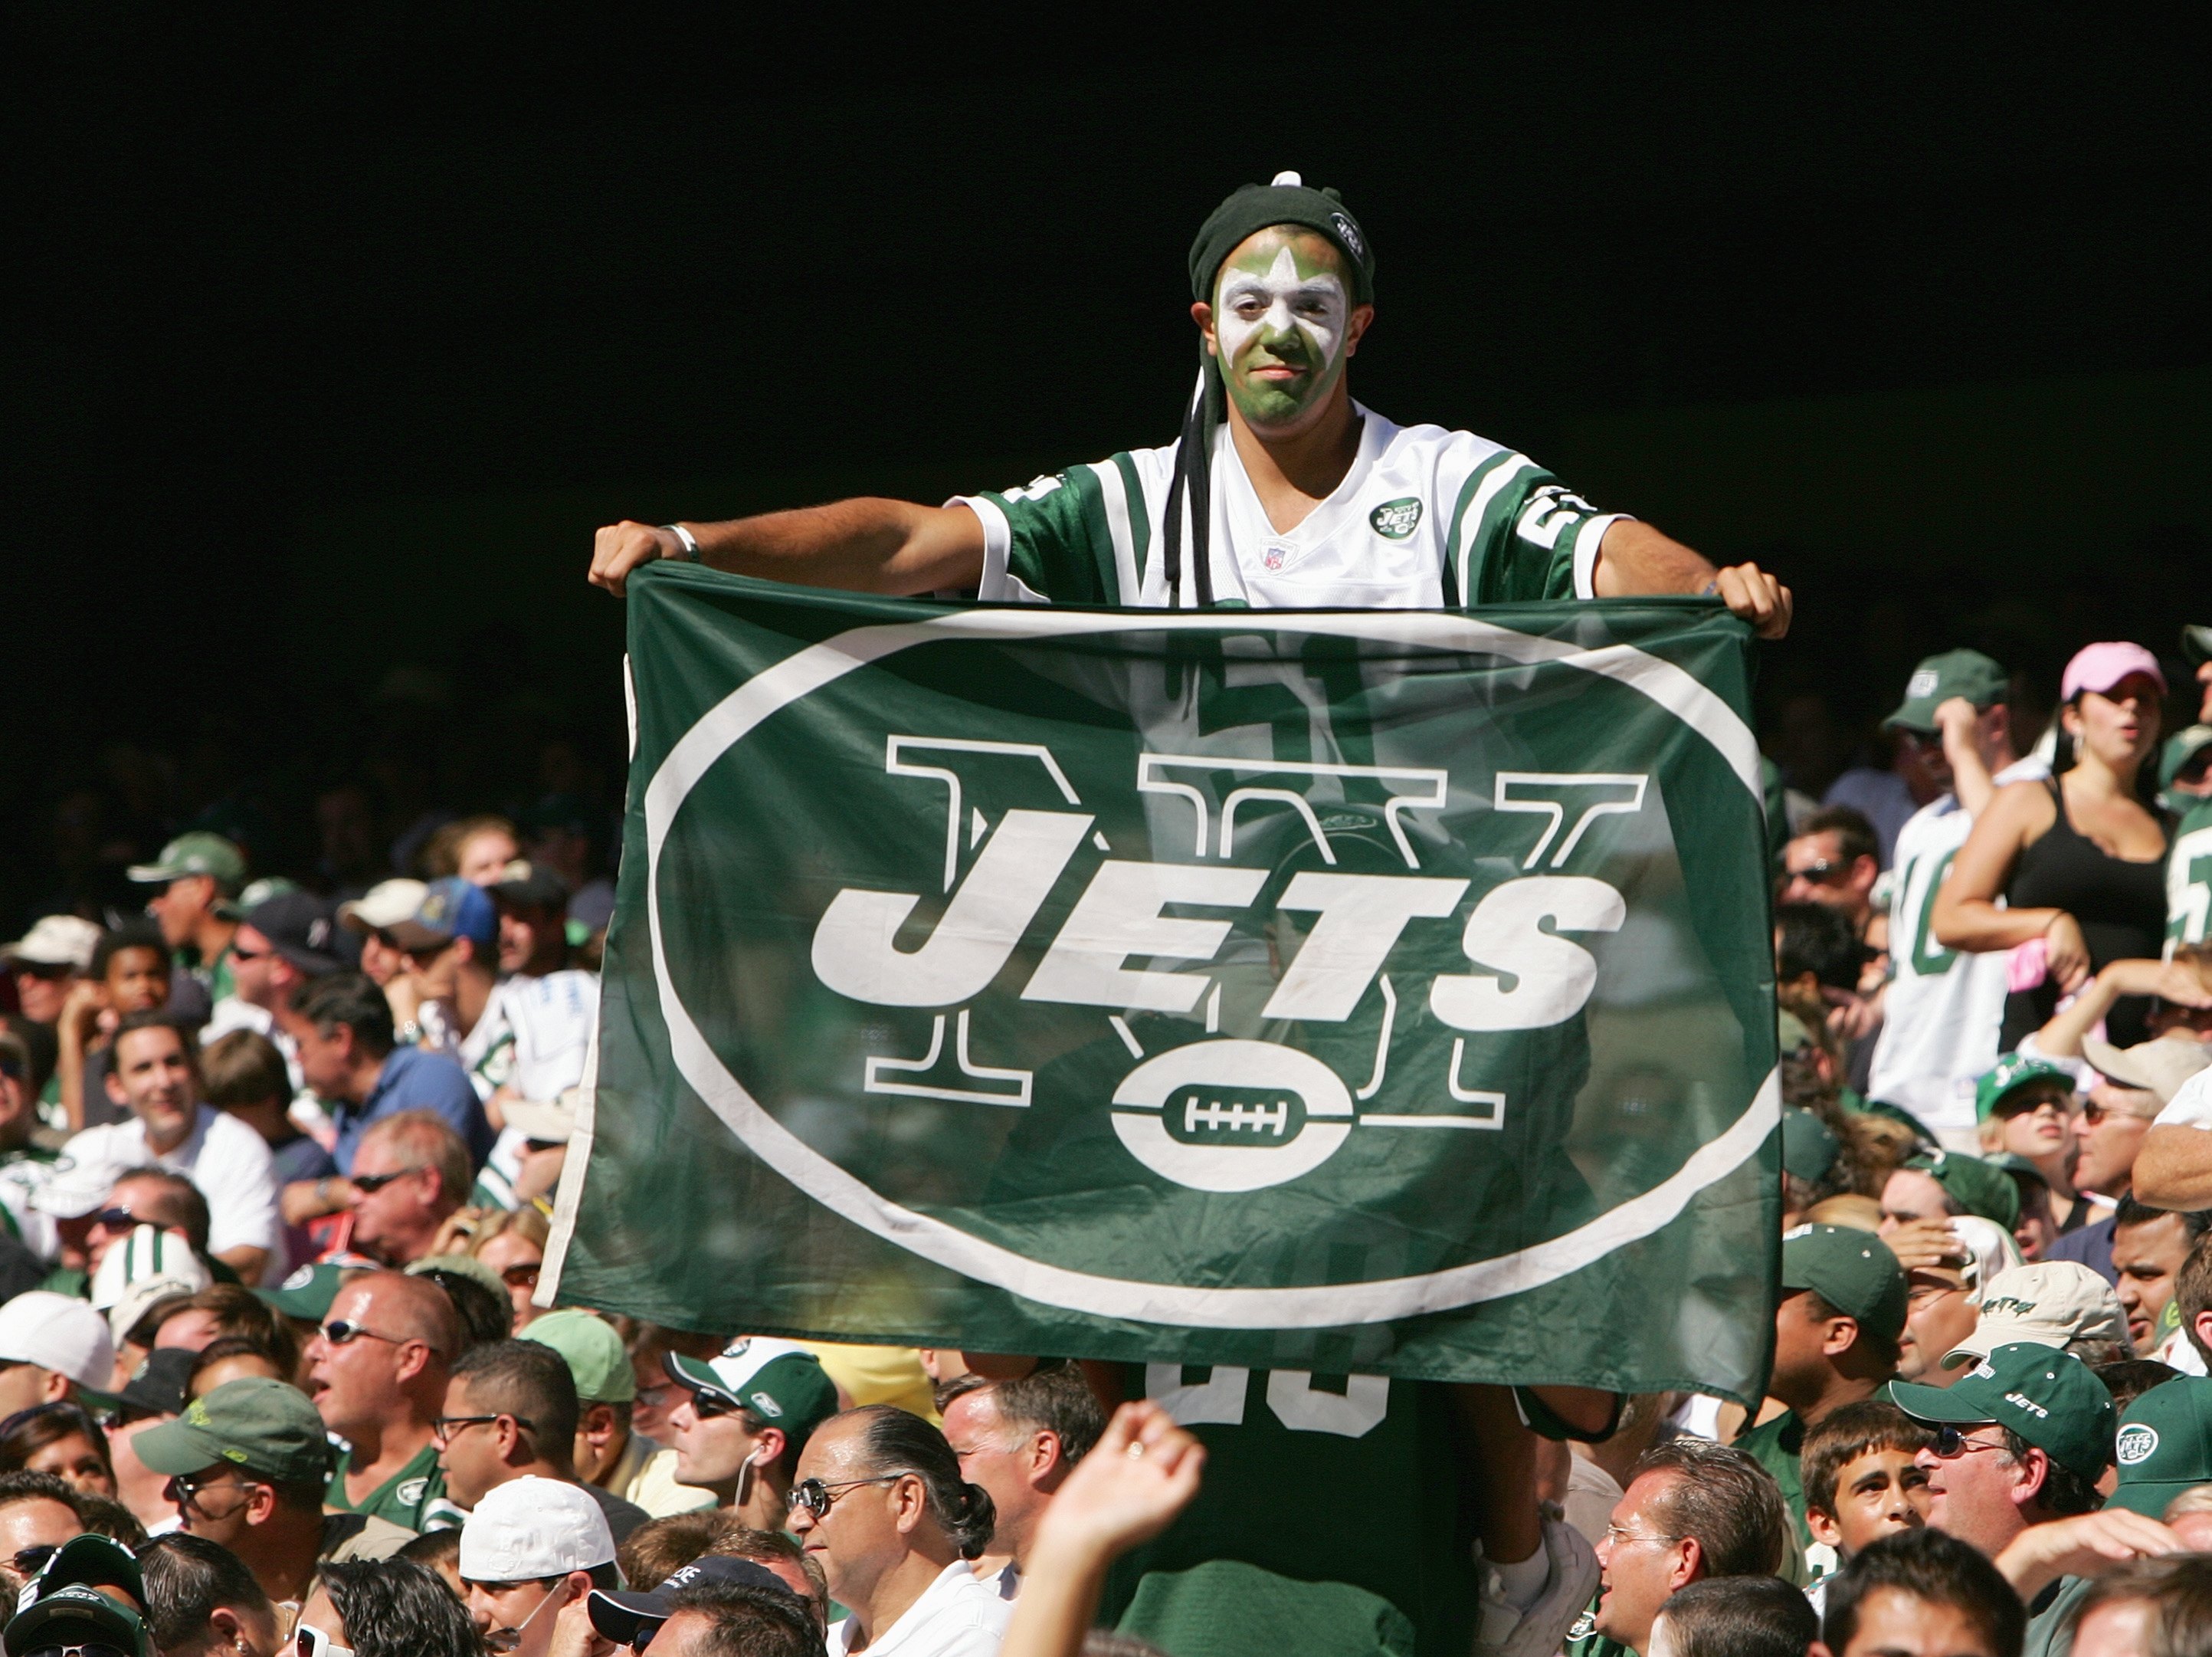 EAST RUTHERFORD, NJ - SEPTEMBER 23: A fan of the New York Jets holds up a Jets flag during the game against the Miami Dolphins on September 23, 2007 at Giants Stadium in East Rutherford, New Jersey. The Jets defeated the Dolphins 31-28. (Photo by Al Bello